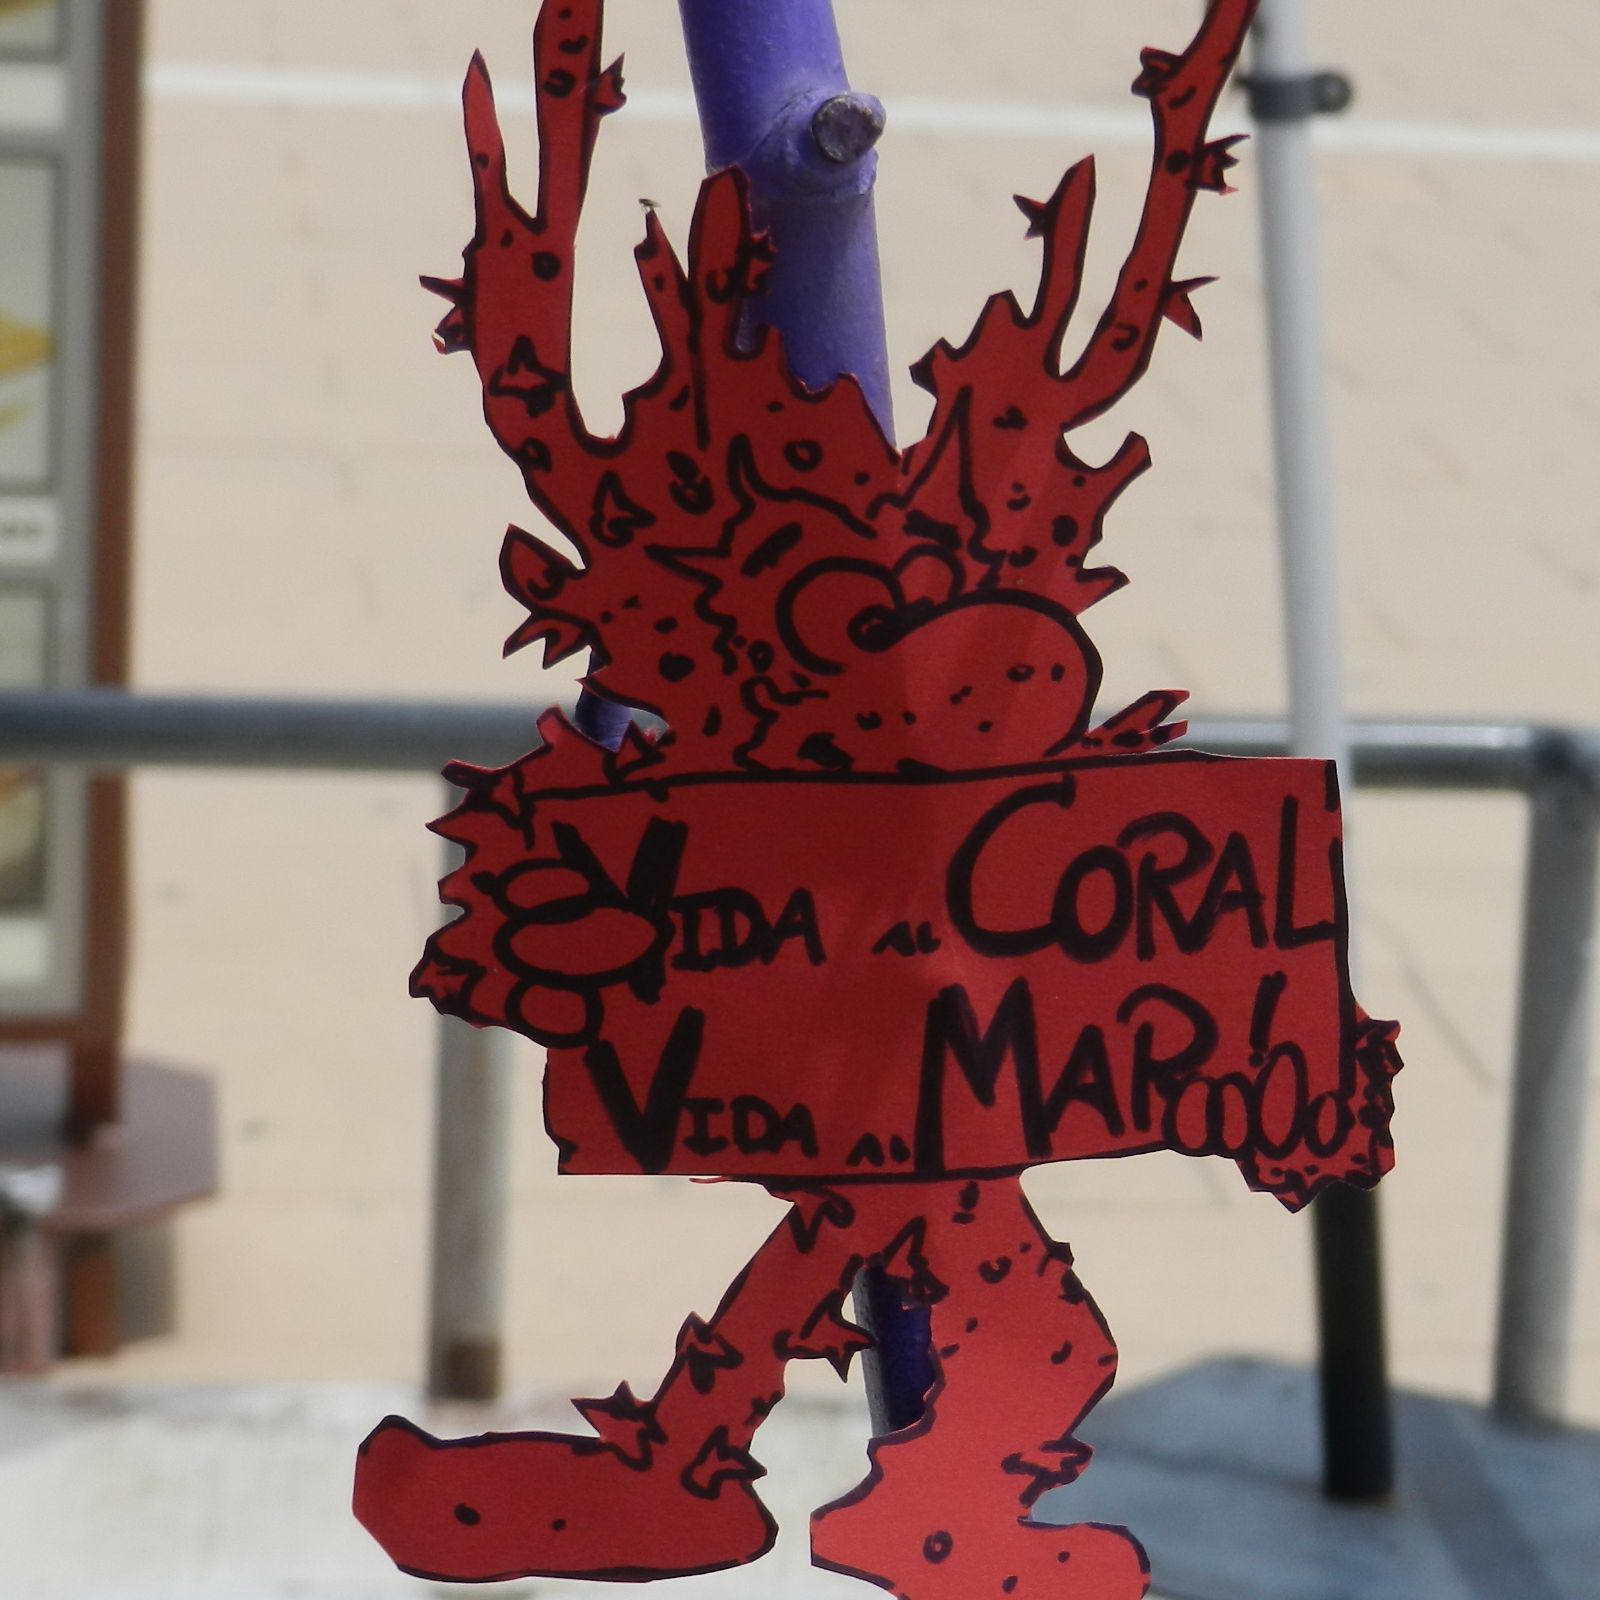 Mascot of the Red Coral Initiative